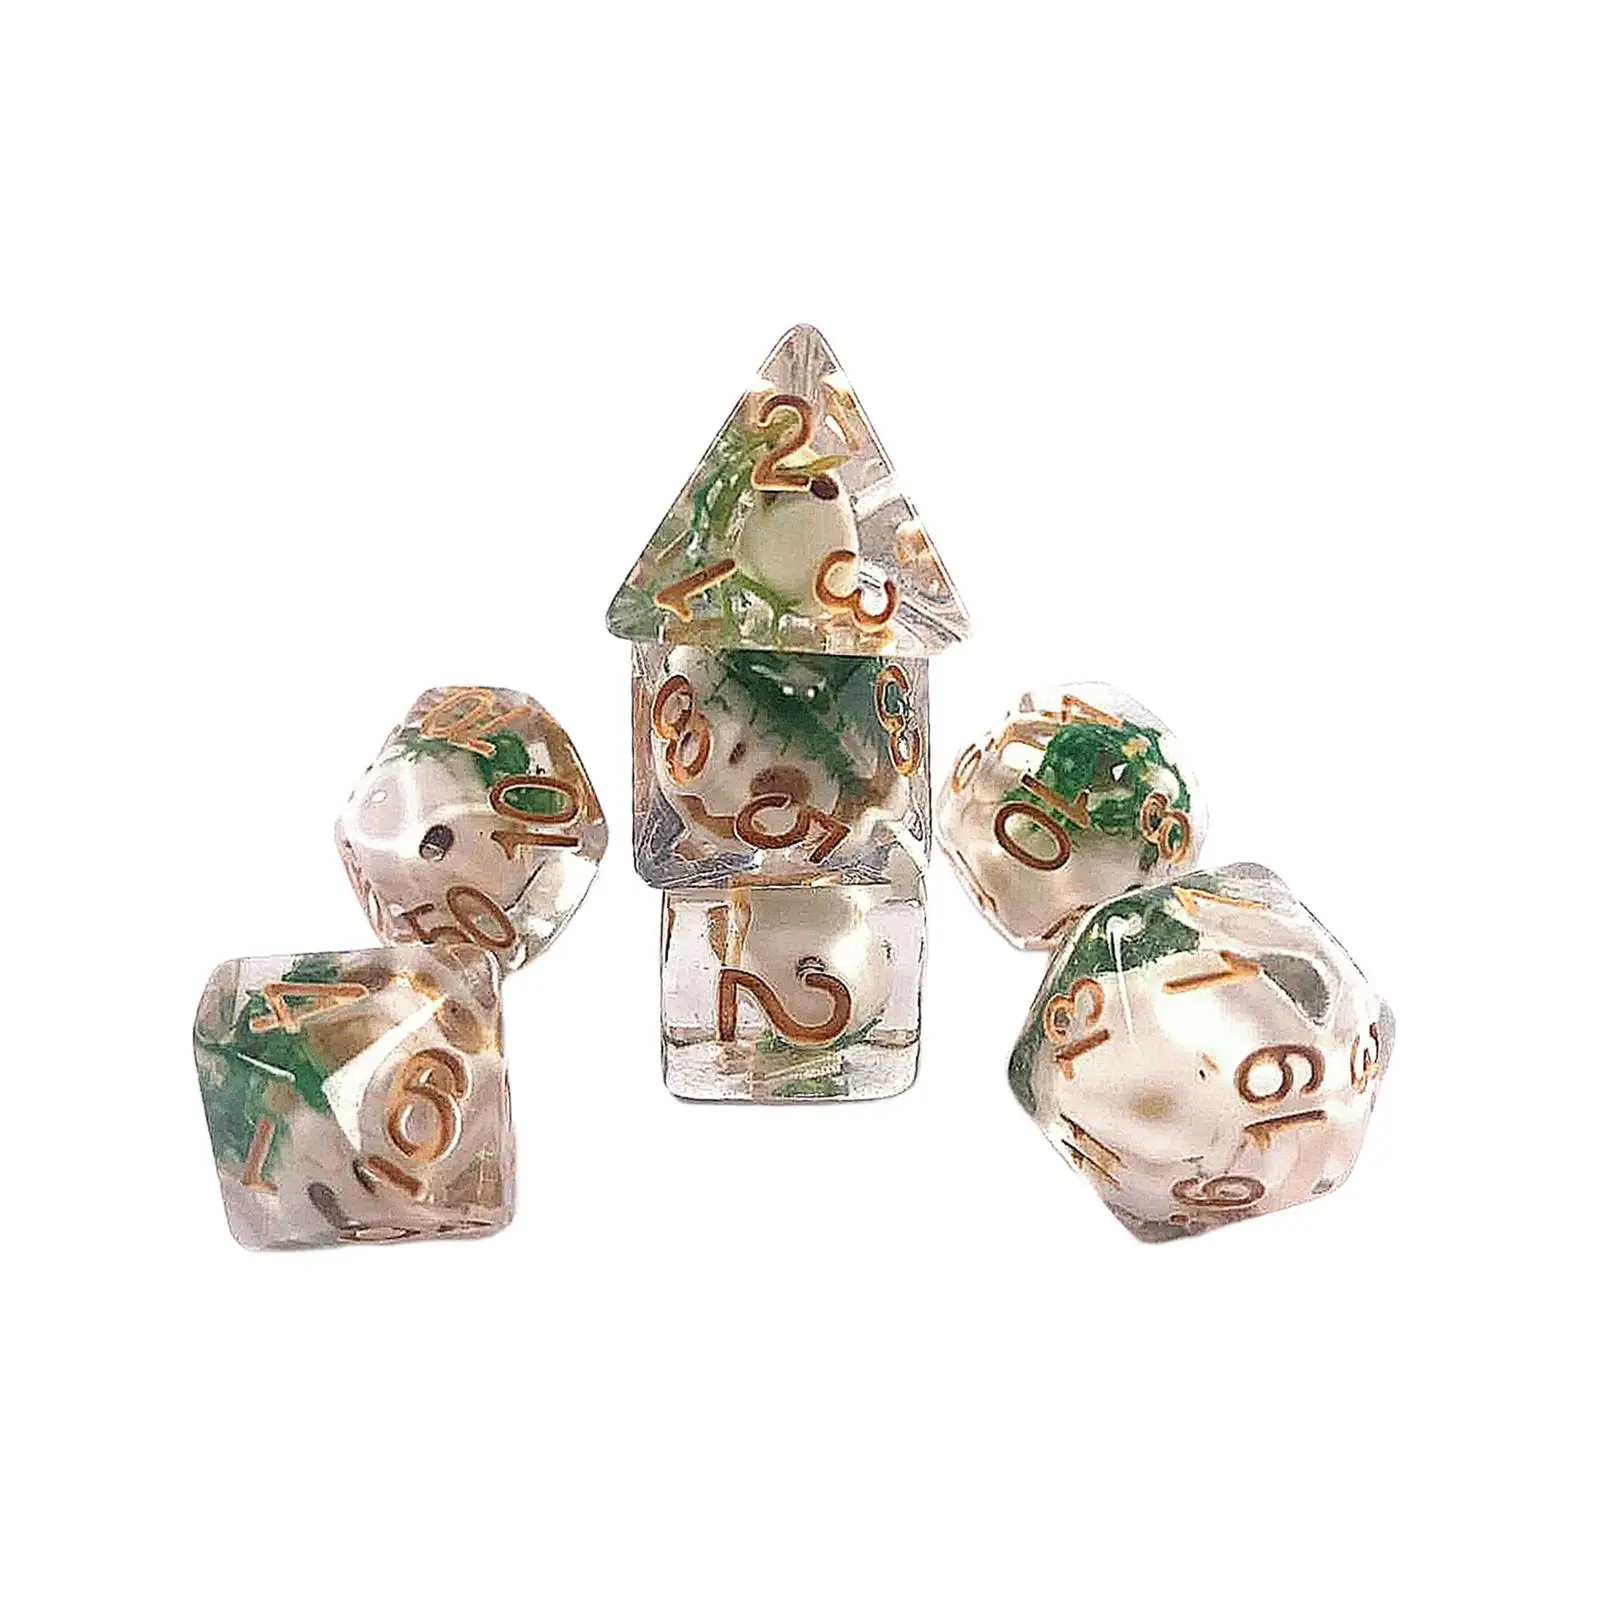 7x Multi Sided Dices Set Role Playing Dice Table Board Roll Playing Games for Role Playing Party Table Game